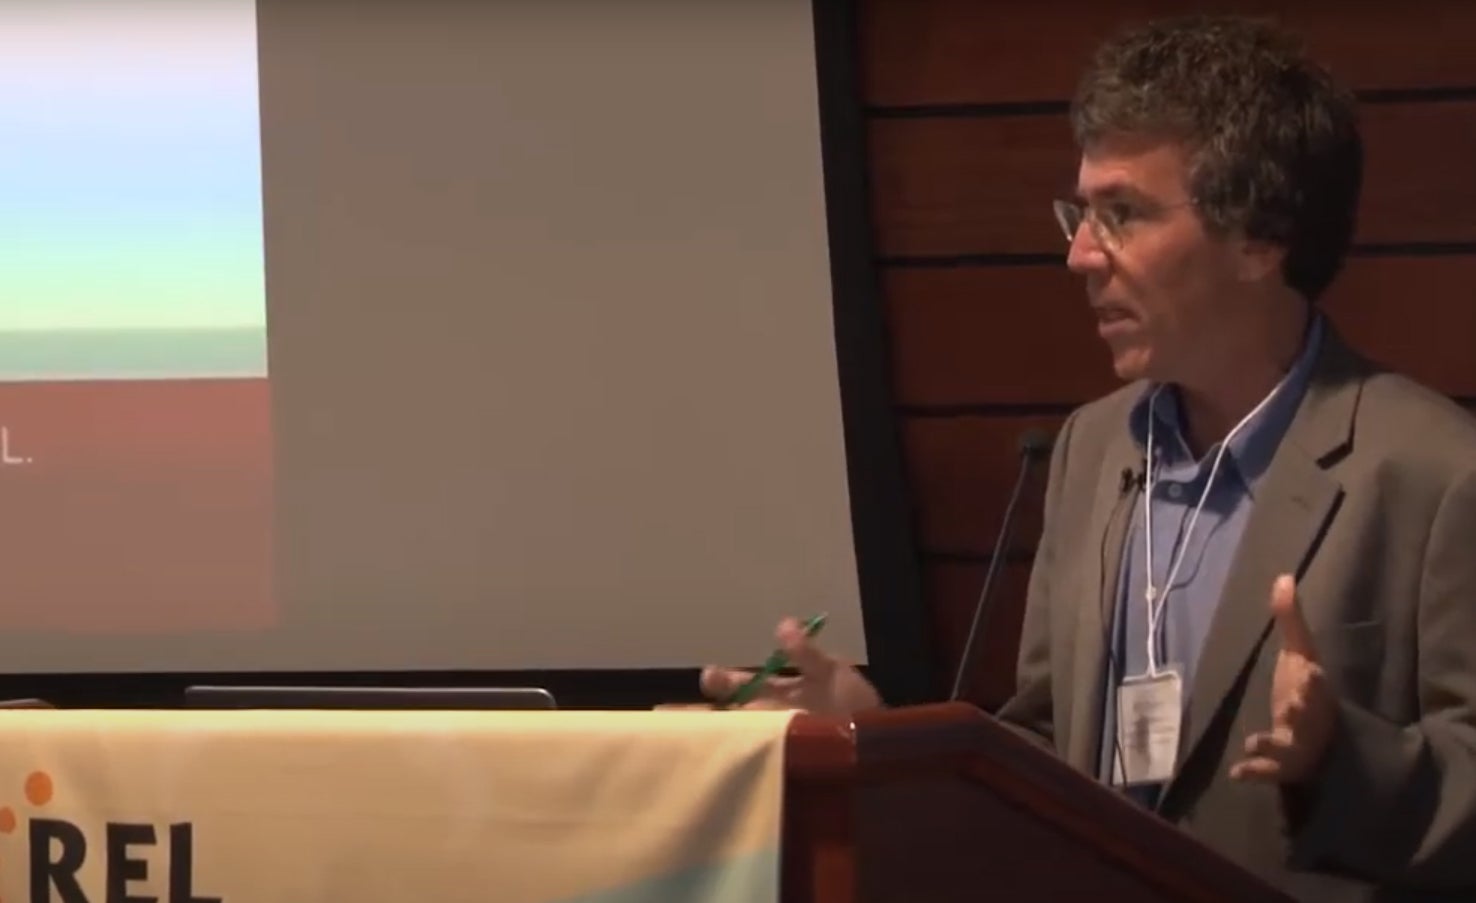 In this video, William T. Gormley Jr., Ph.D., delivers the keynote address, 